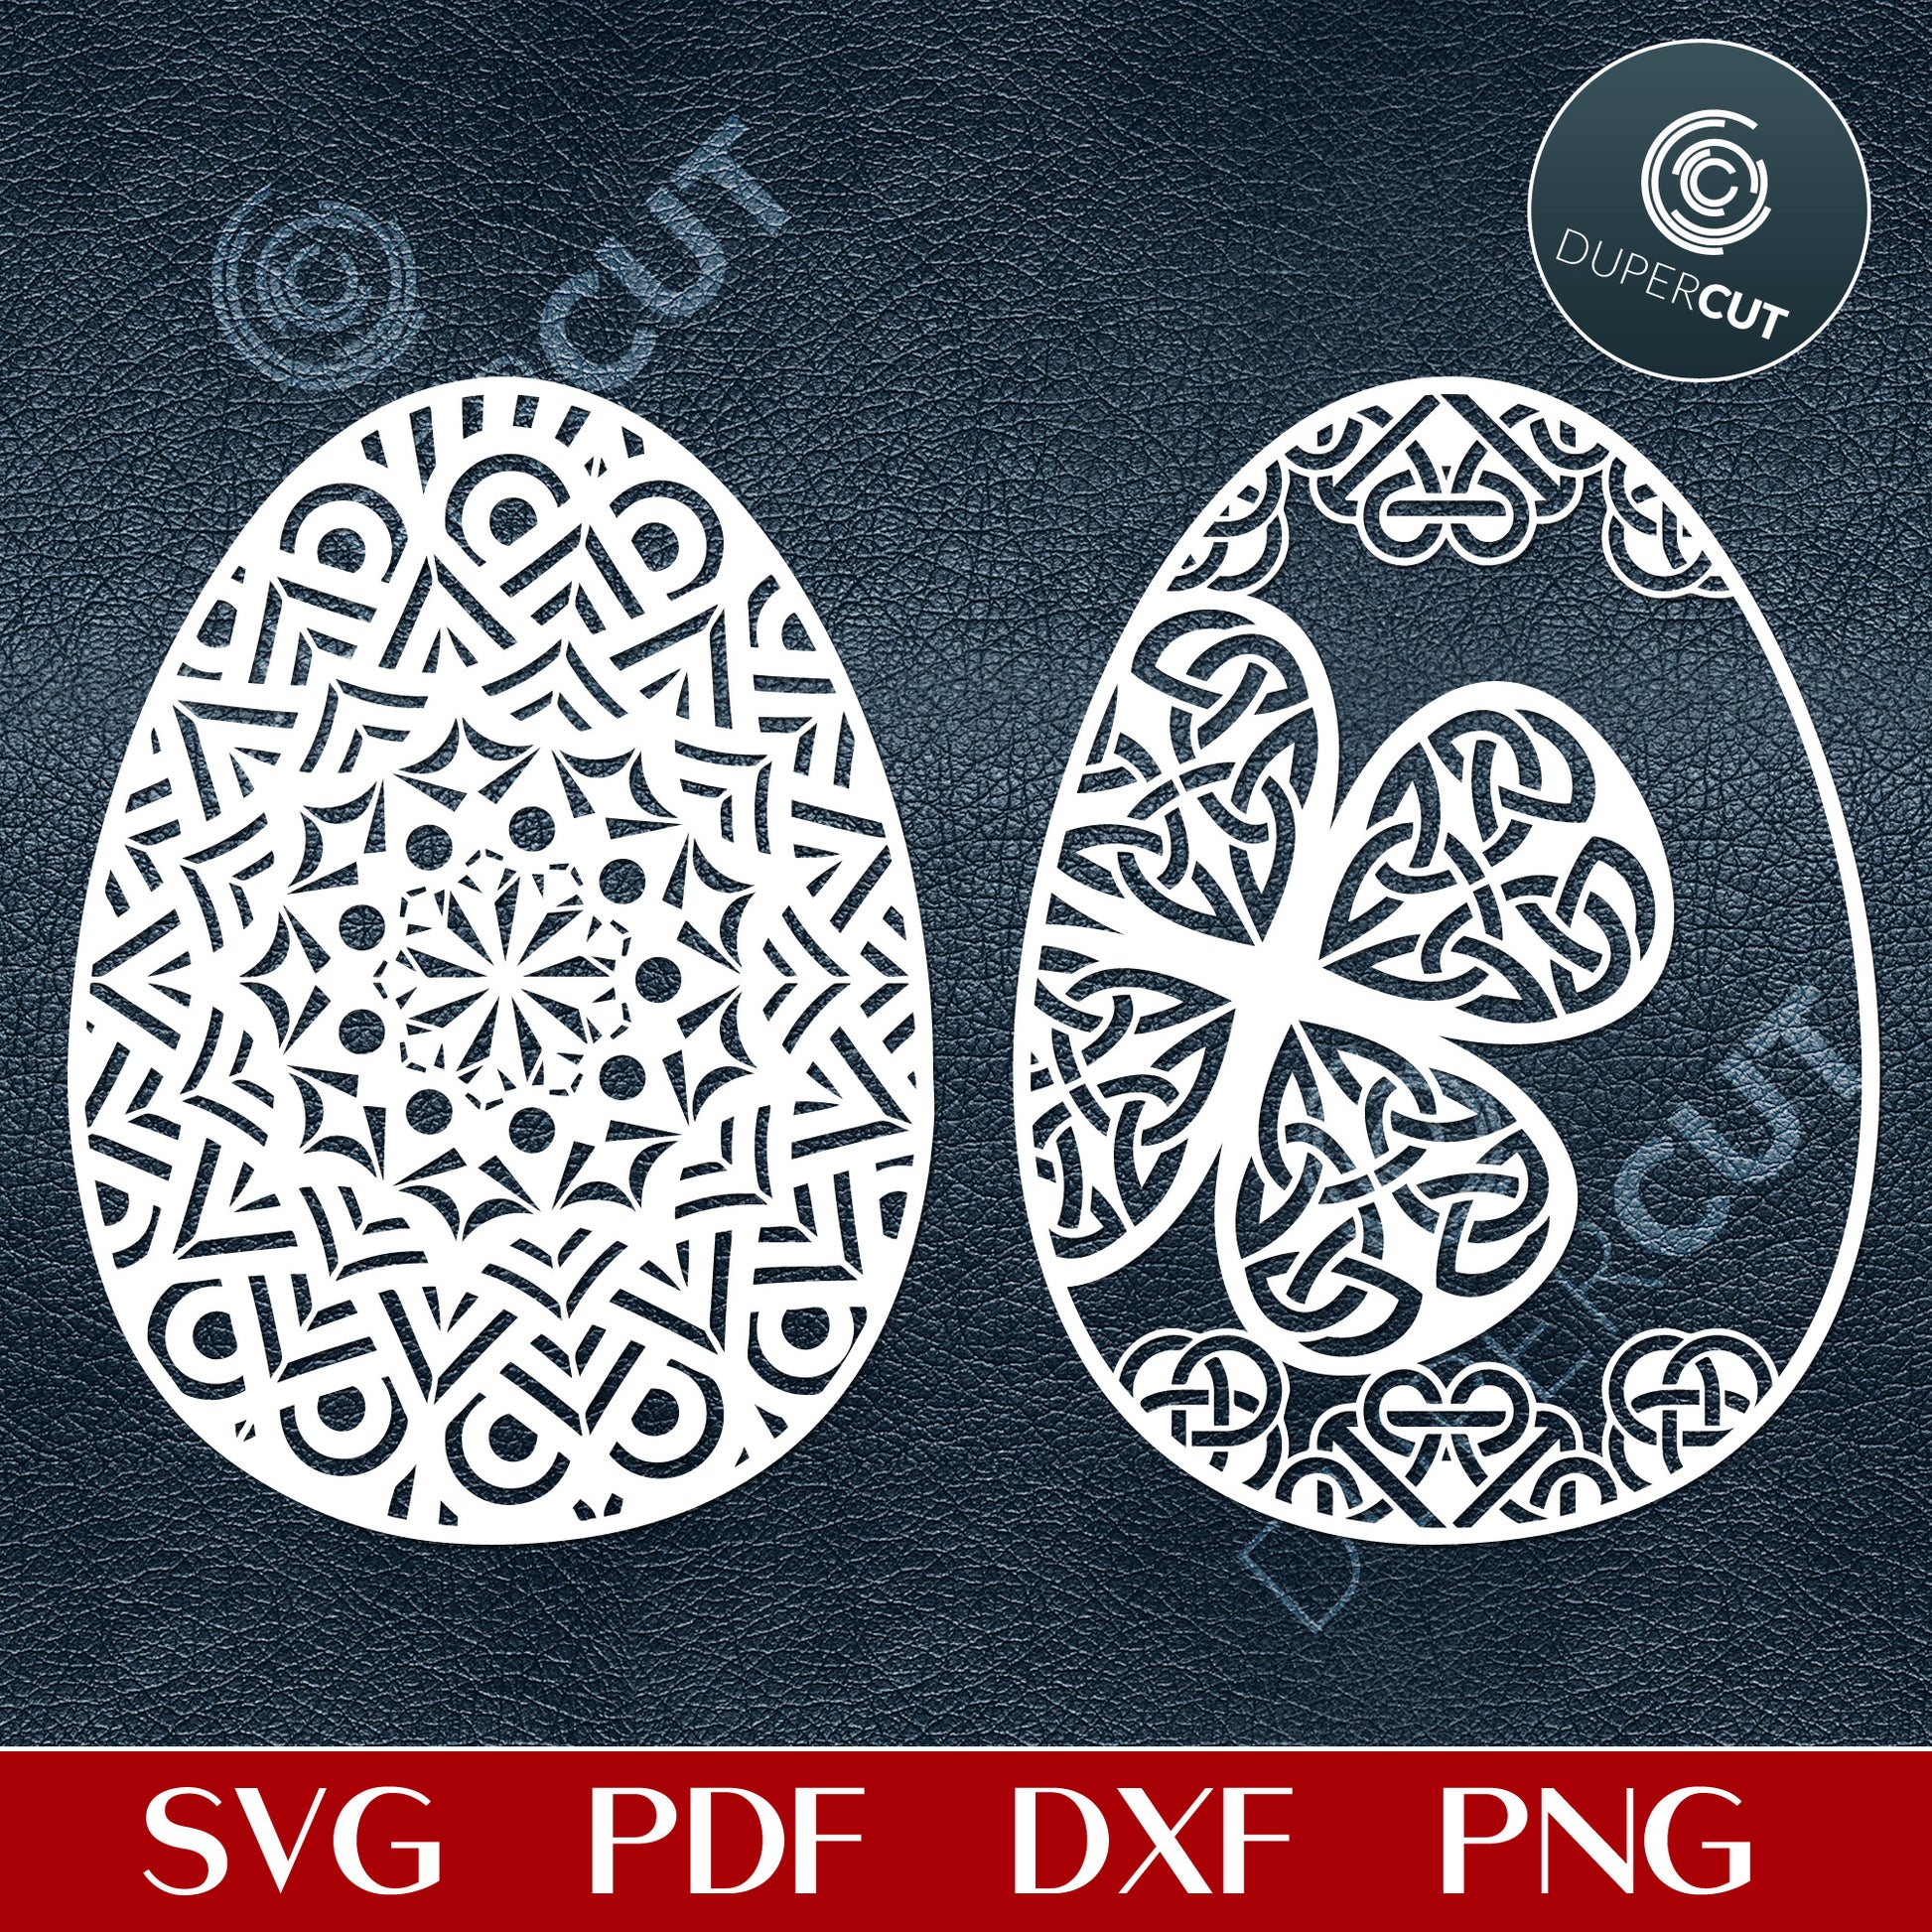 Pysanka easter eggs cutting files - SVG DXF PNG vector files for laser and CNC machines, Cricut, Silhouette Cameo, Glowforge projects. 